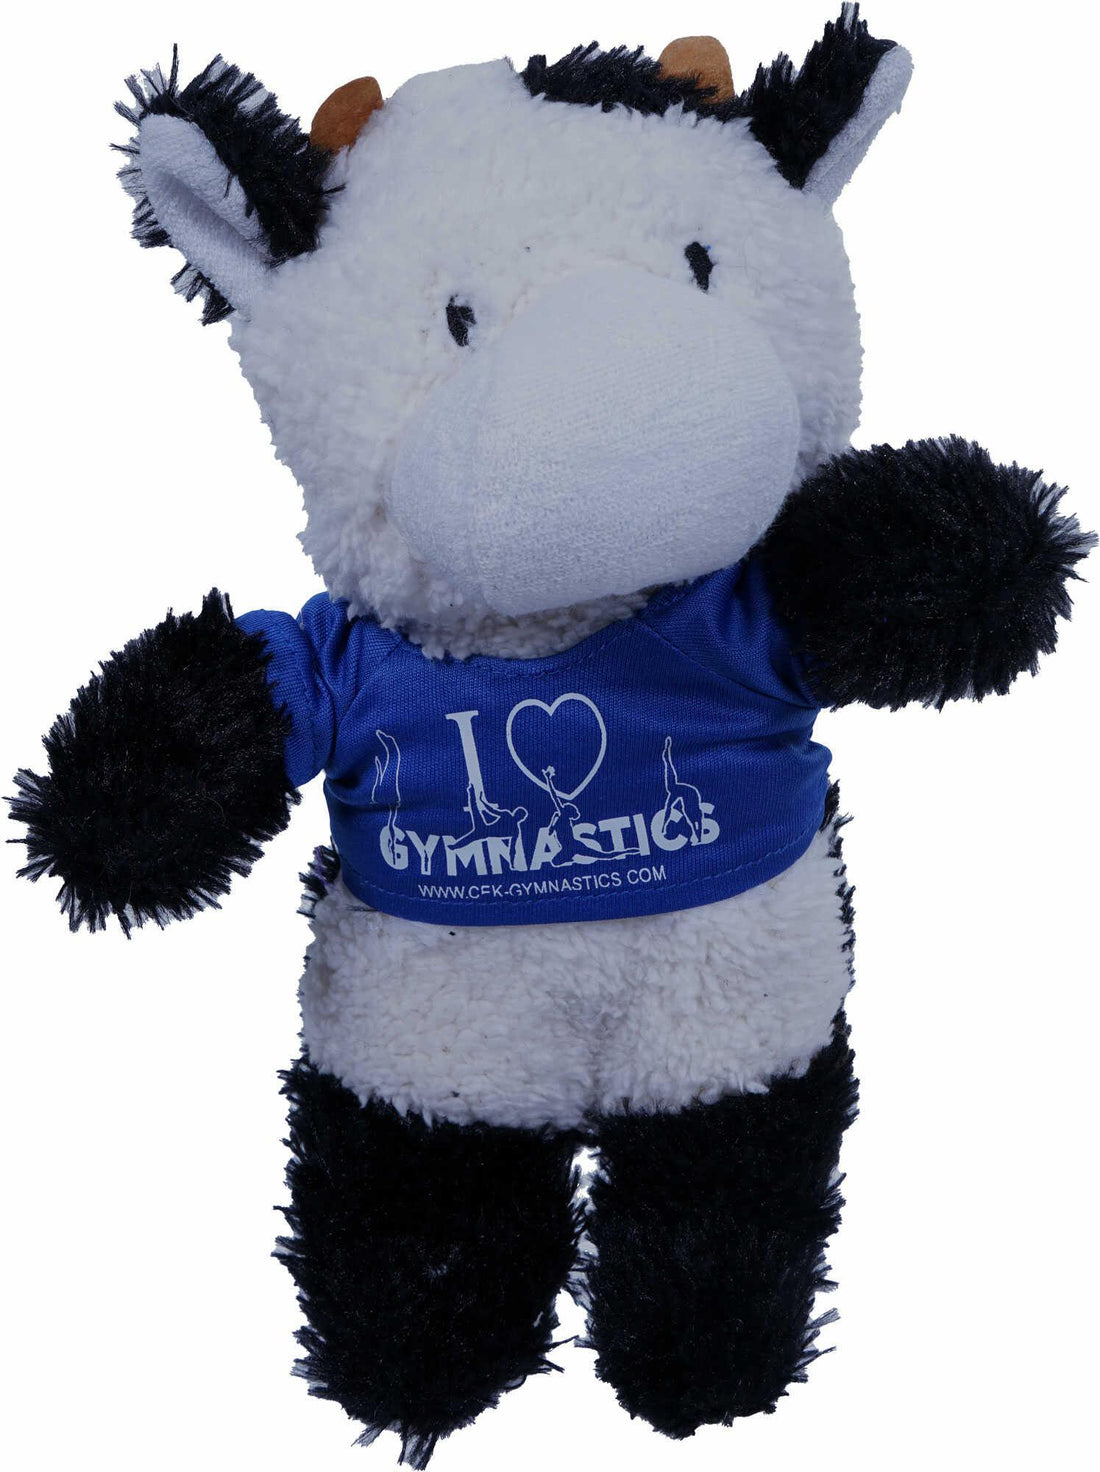 Cow cuddly toy with promo t-shirt